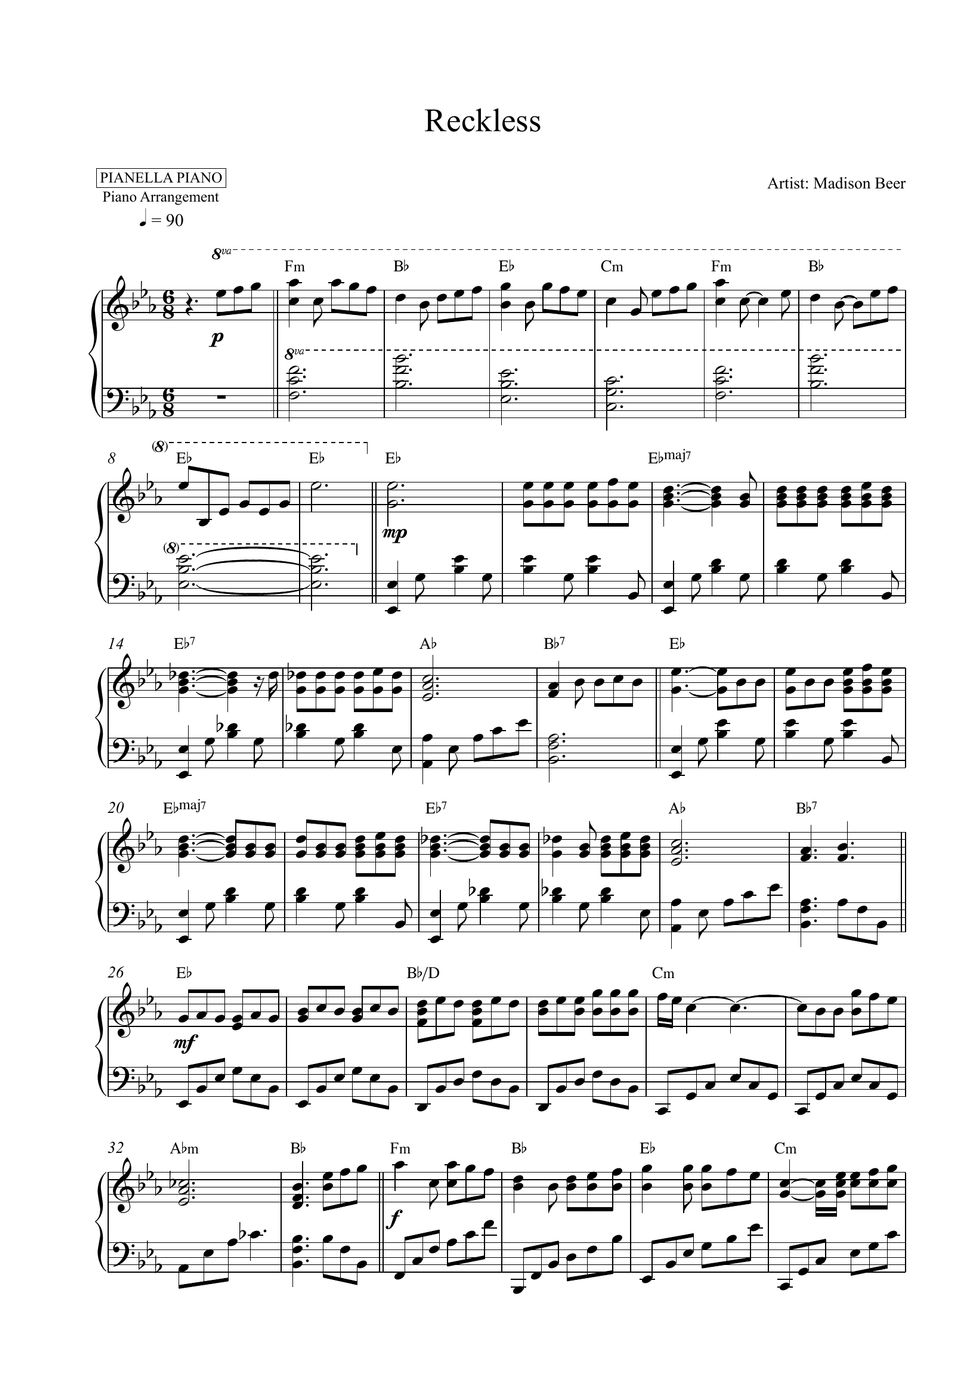 Madison Beer Reckless Piano Sheet Partitura By Pianella Piano 